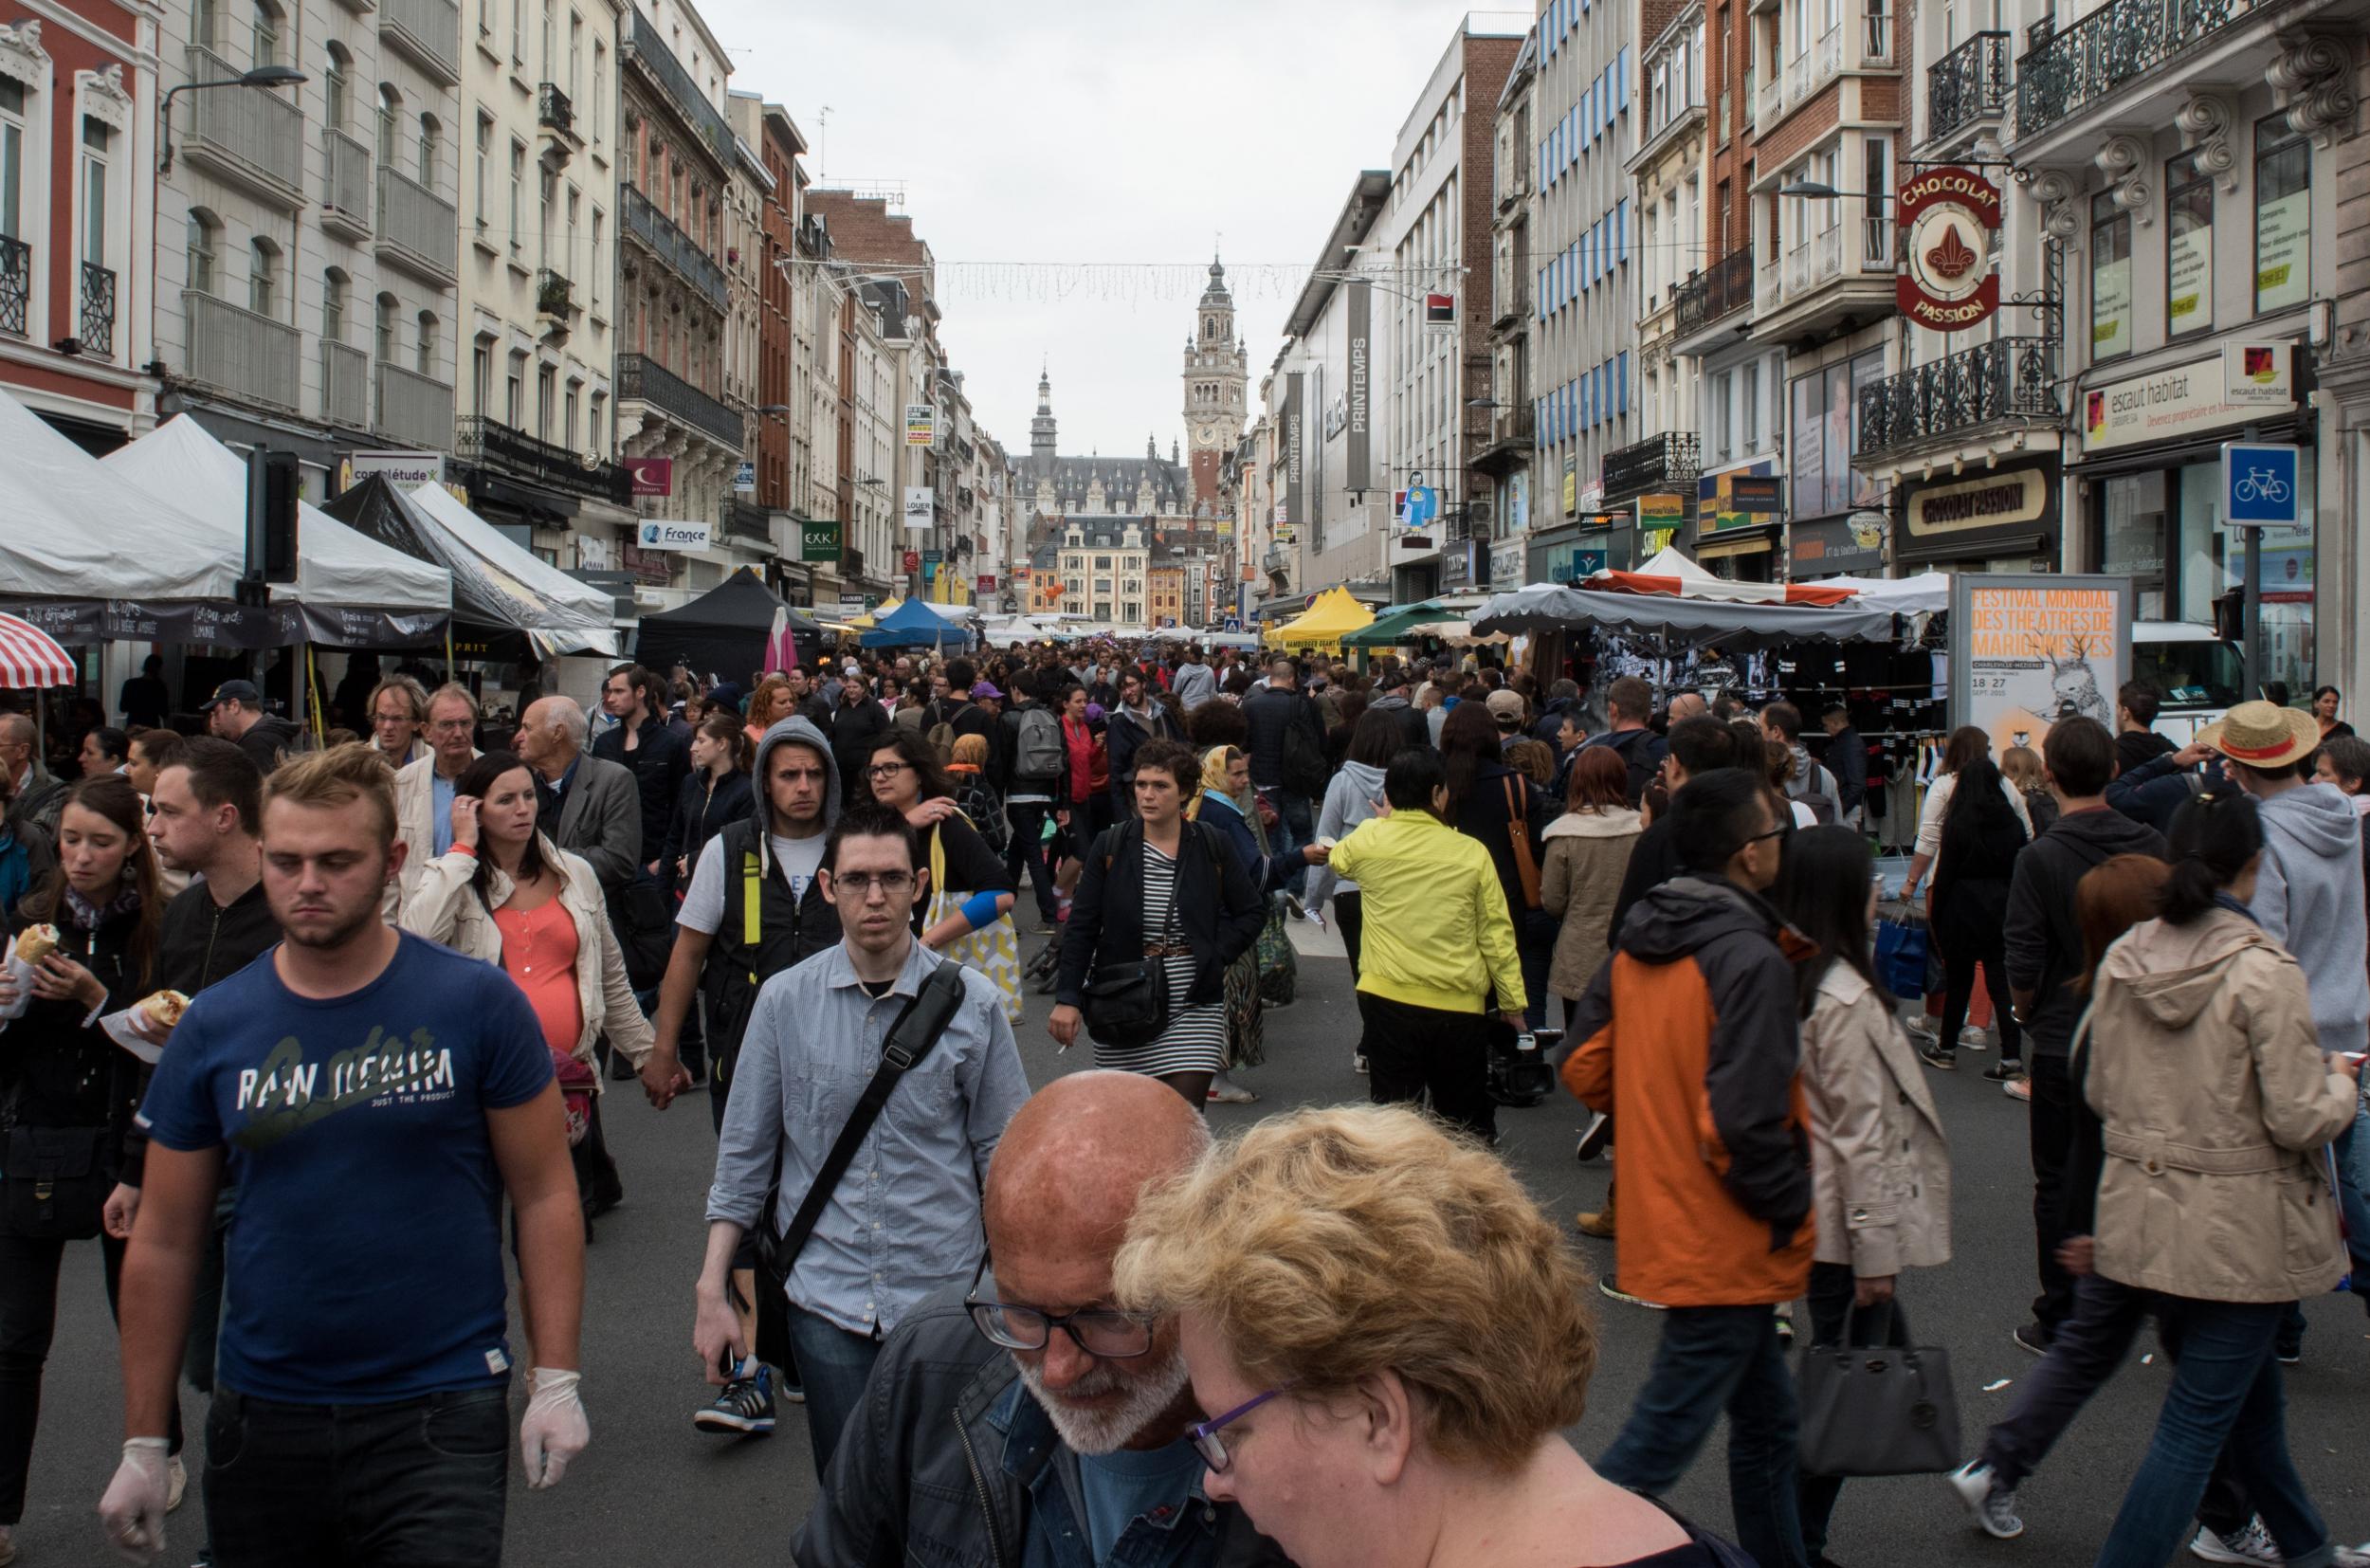 Around 2.5million people visited the market in 2015